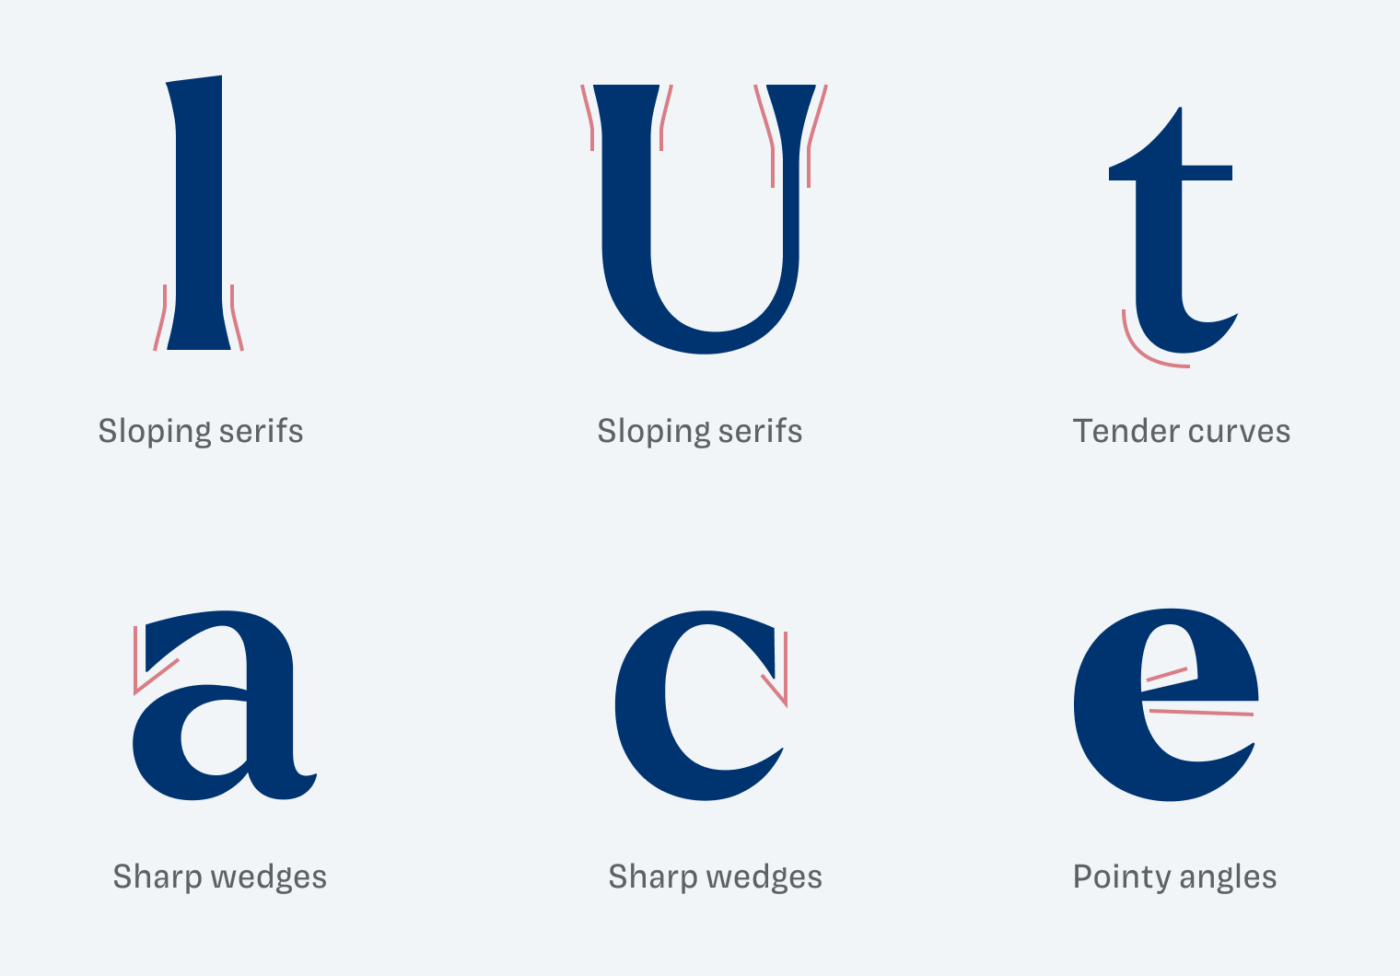 Sloping serifs, Tender curves, Sharp wedges, Pointy angles